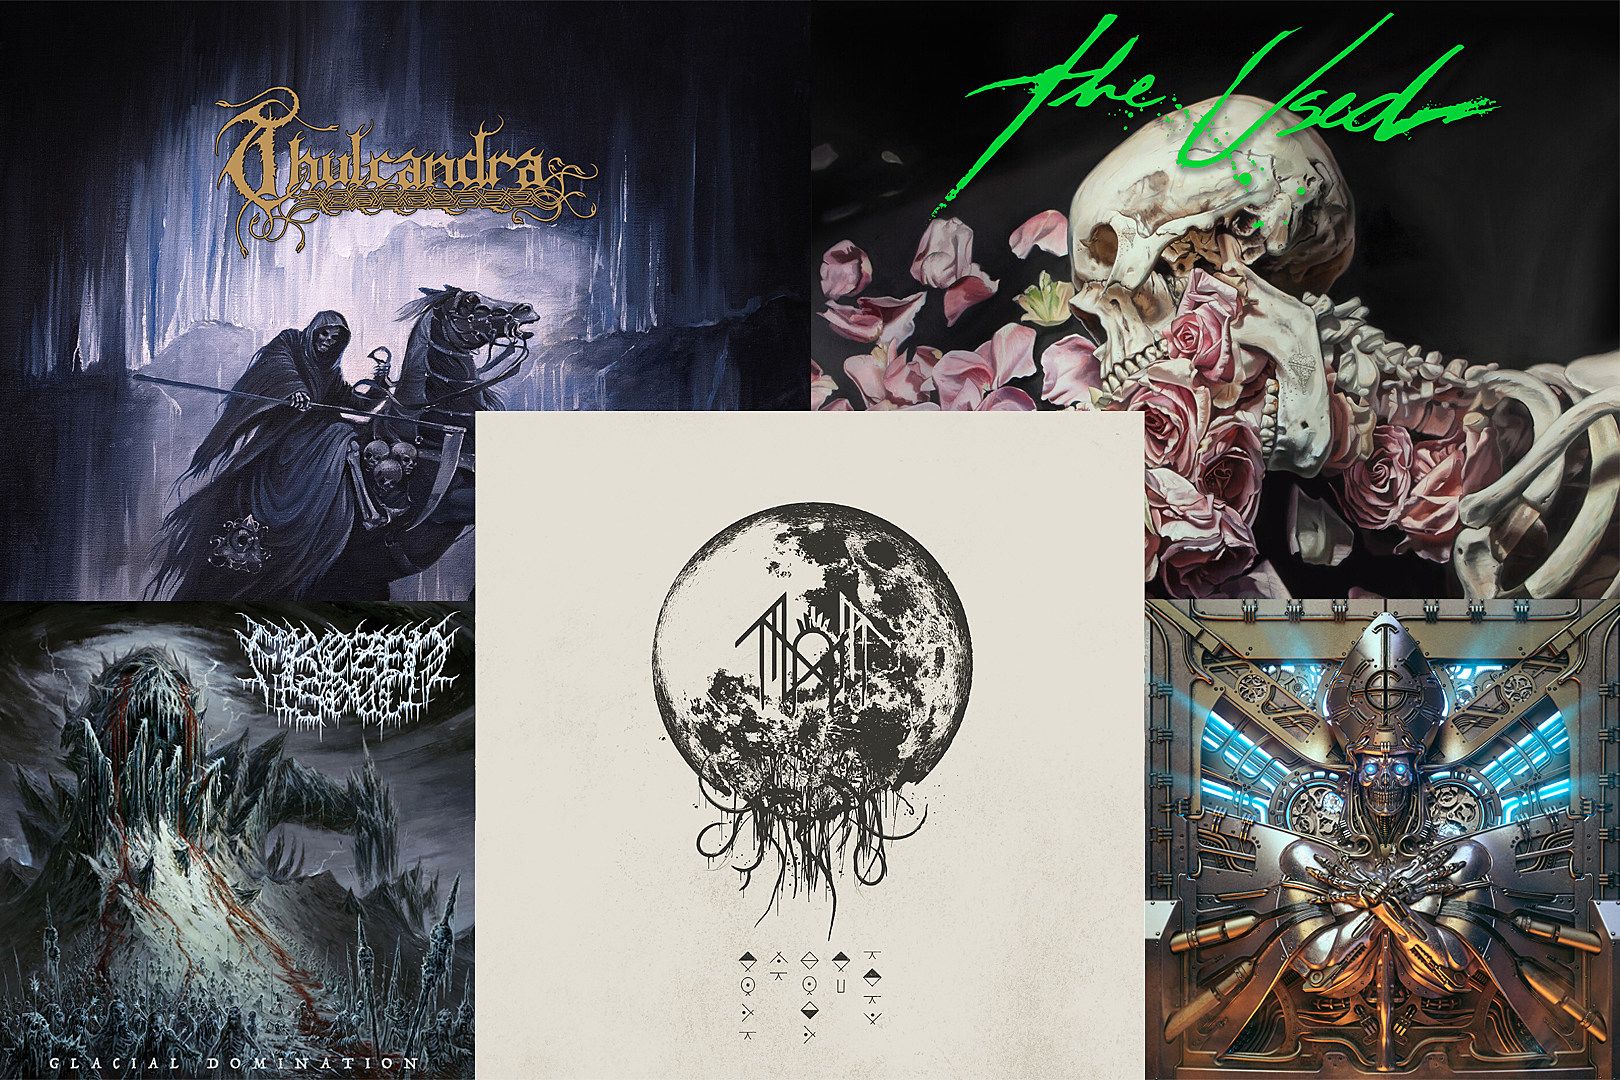 The New Rock + Metal Albums Out Today (May 19)